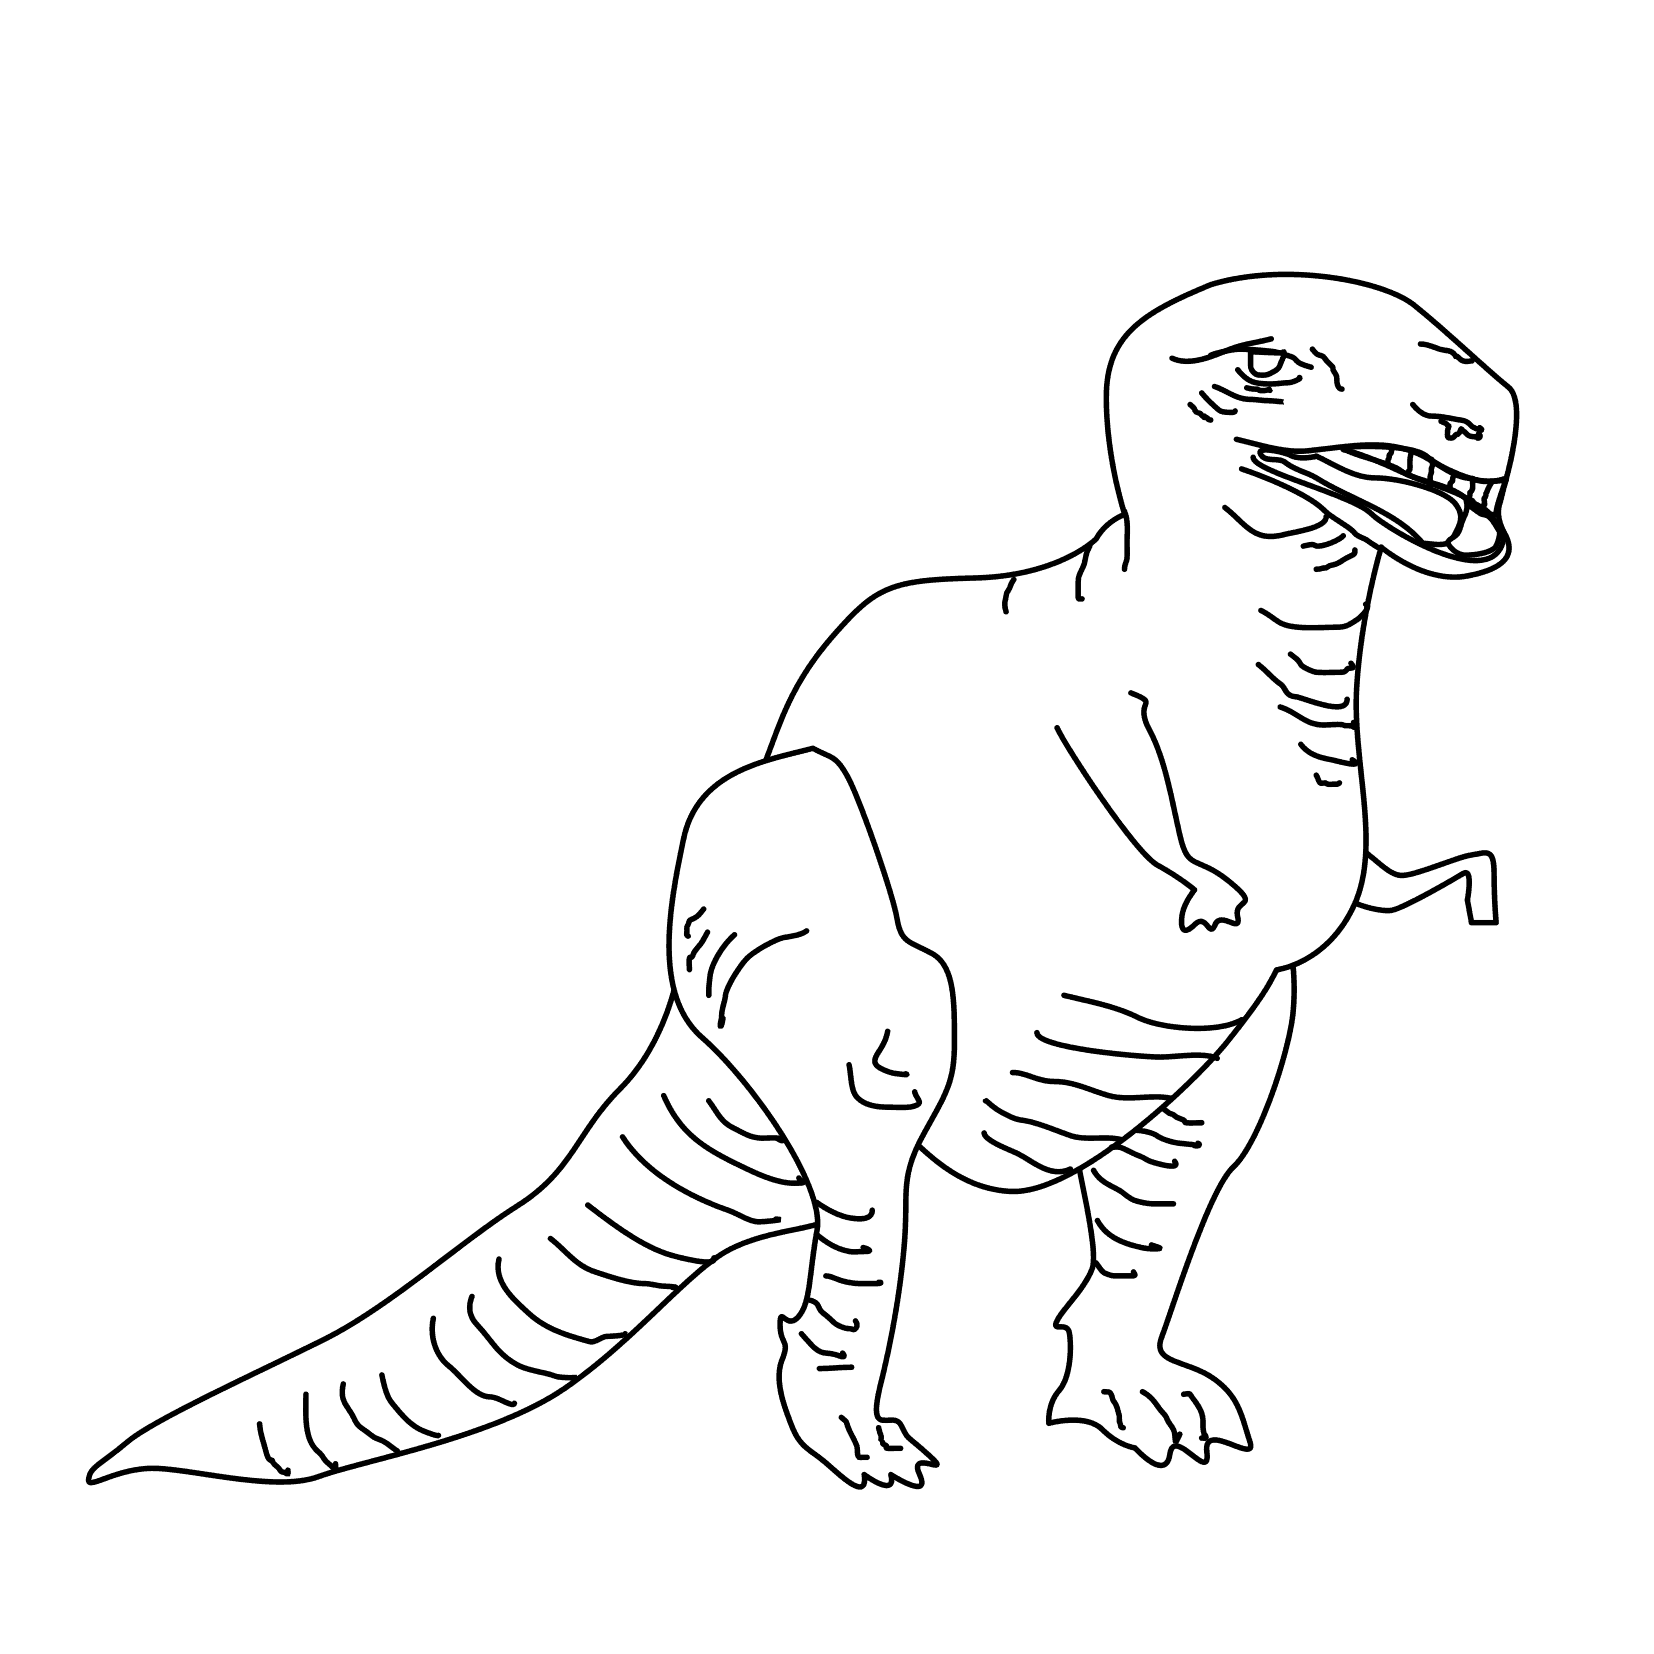 Dinosaurs Coloring Pages for boys Dinosaurs Printable 2020 0302 Coloring4free